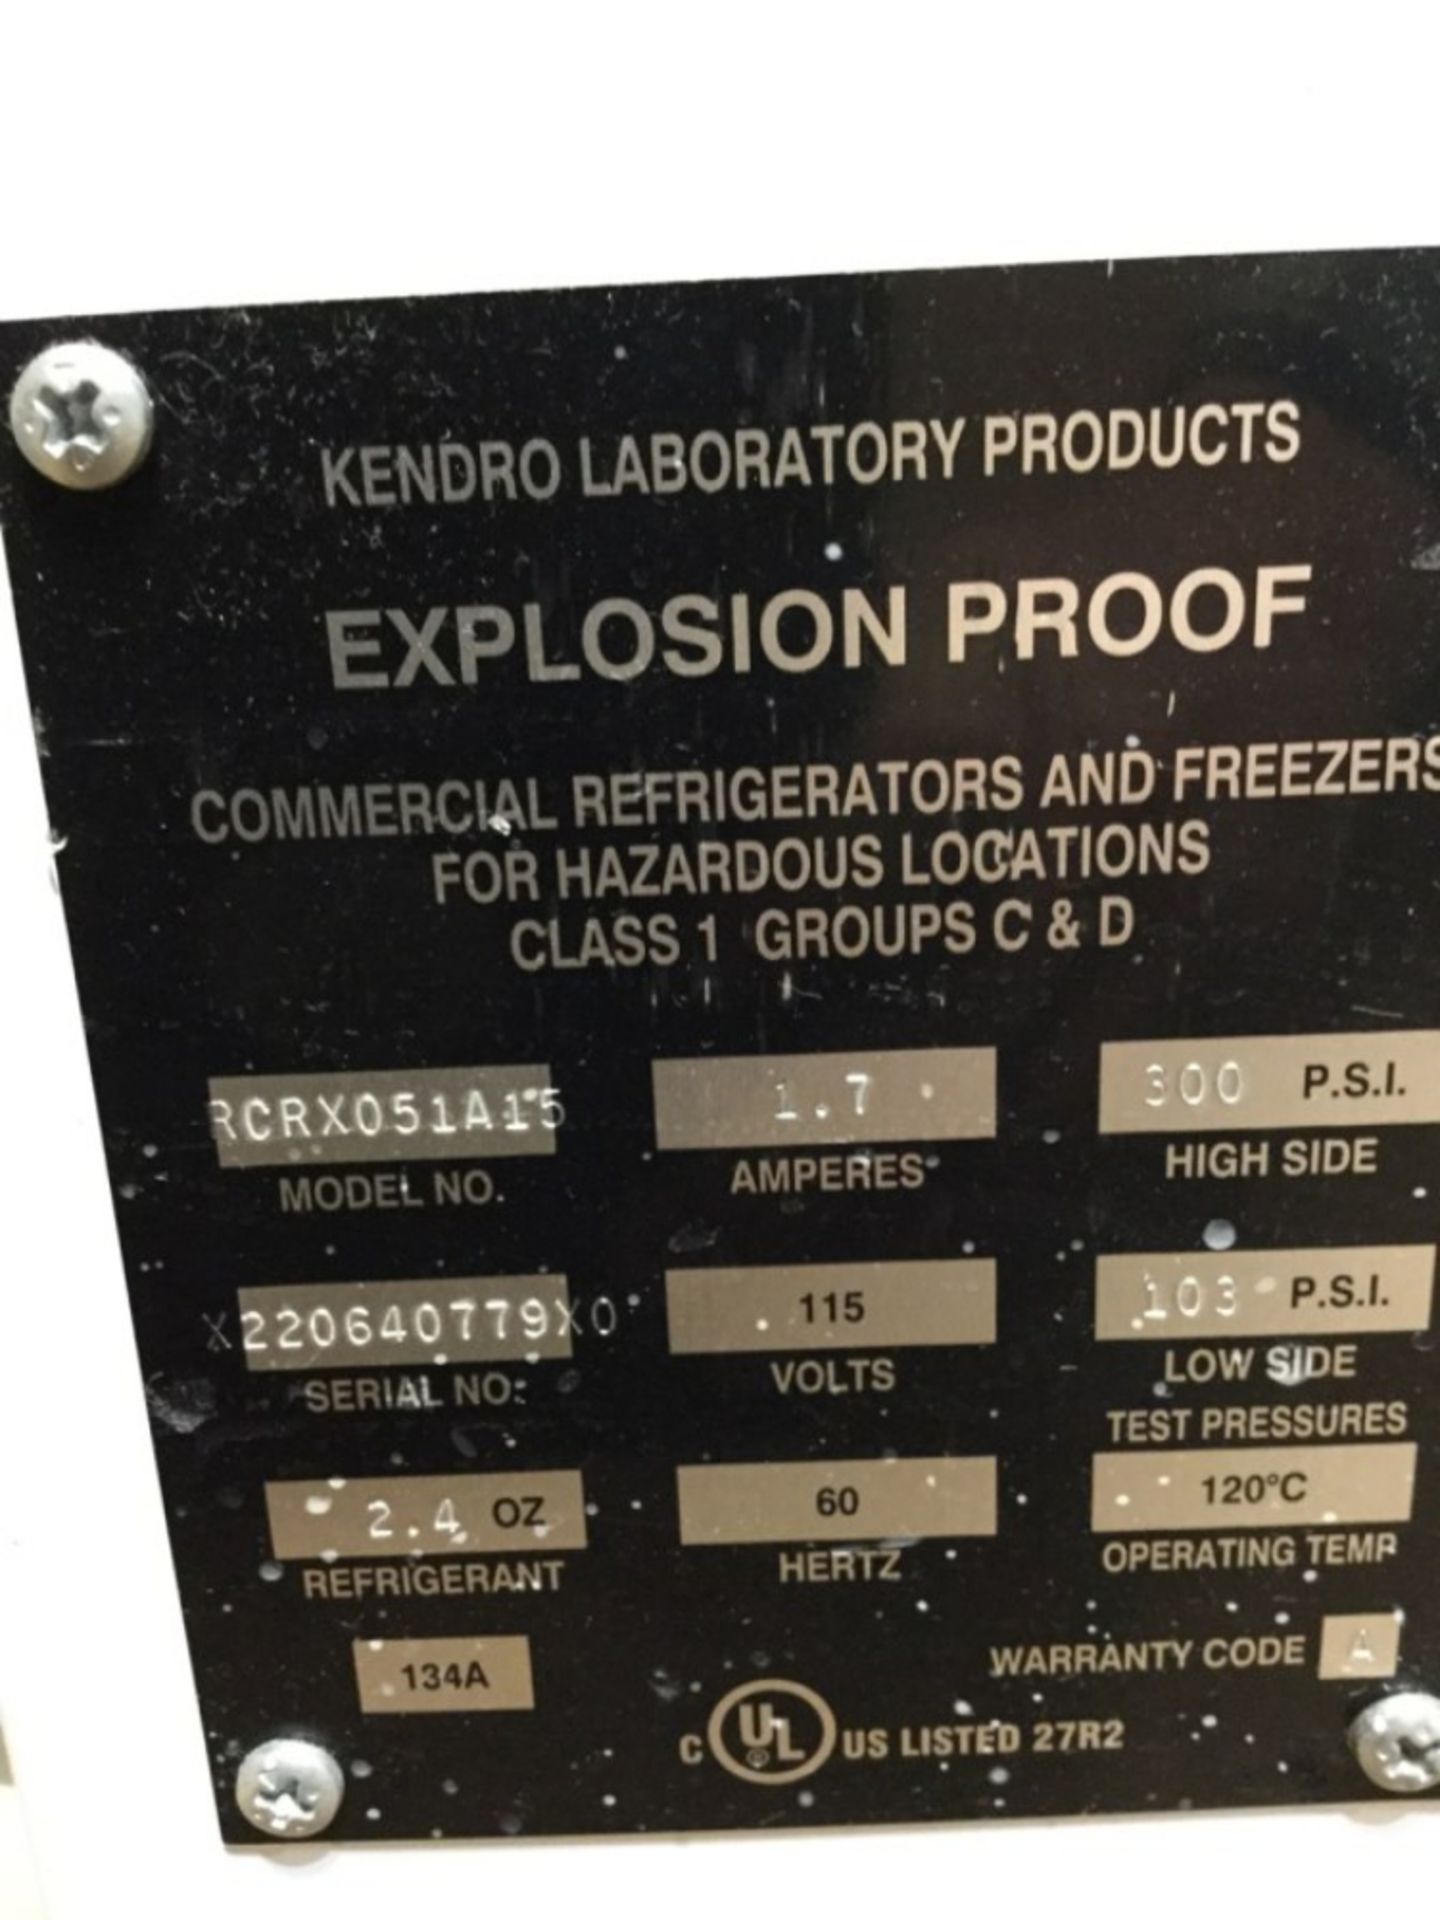 Kendro Revco Explosion Proof Undercounter Refrigerator - Image 2 of 3